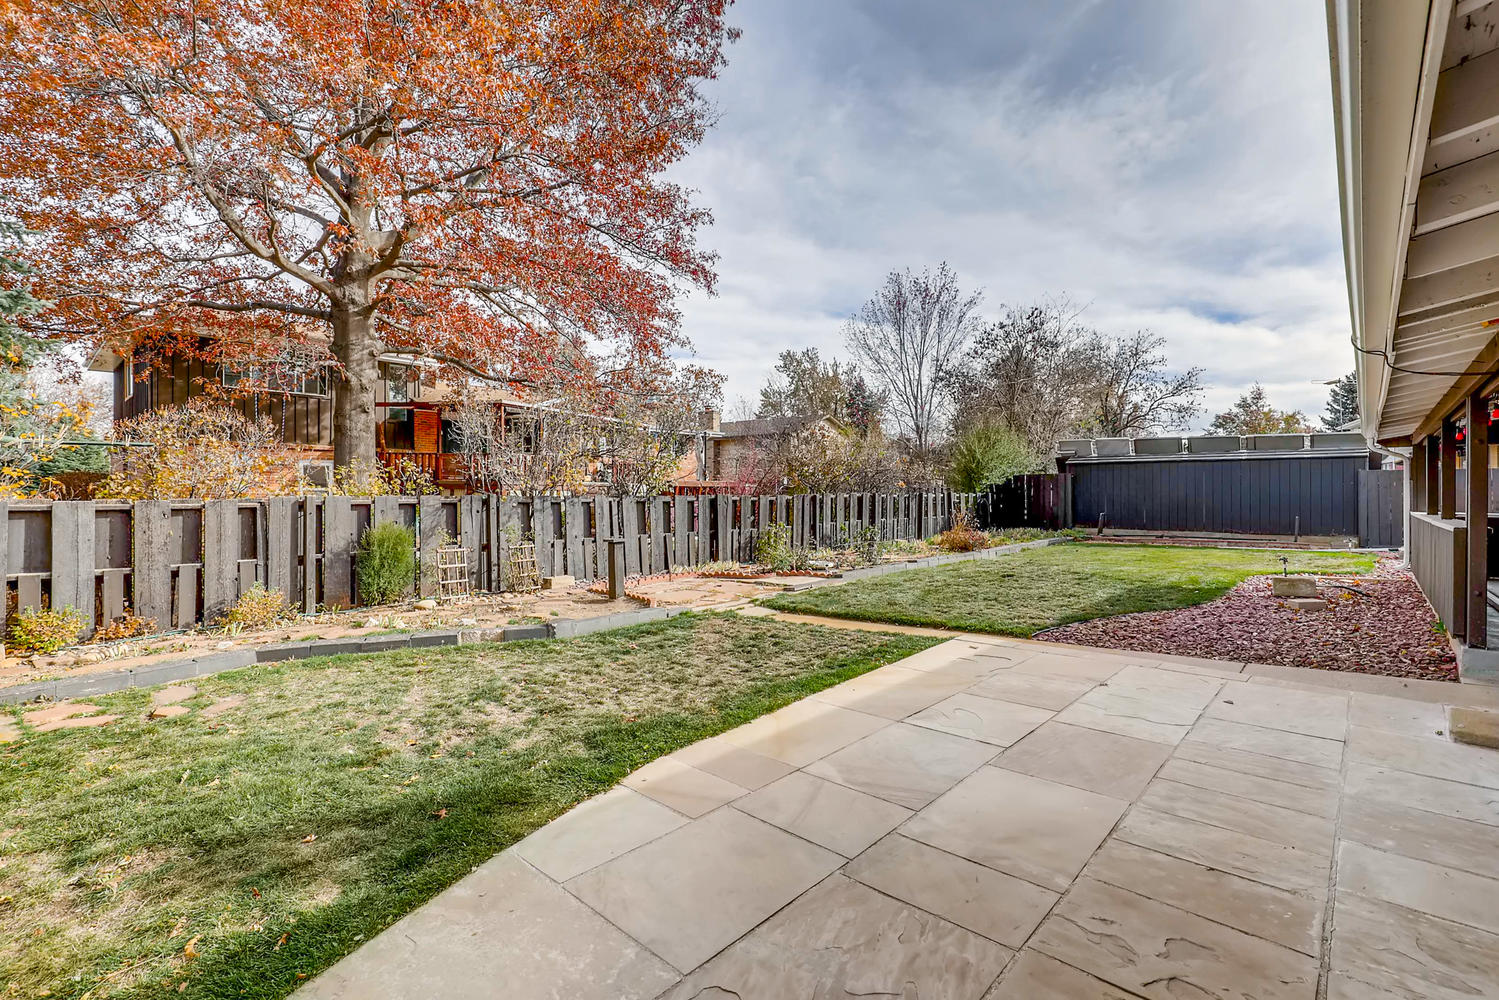 NEW LISTING: 228 Iroquois Dr, Boulder CO 80303 Covered Back Patio & Yard